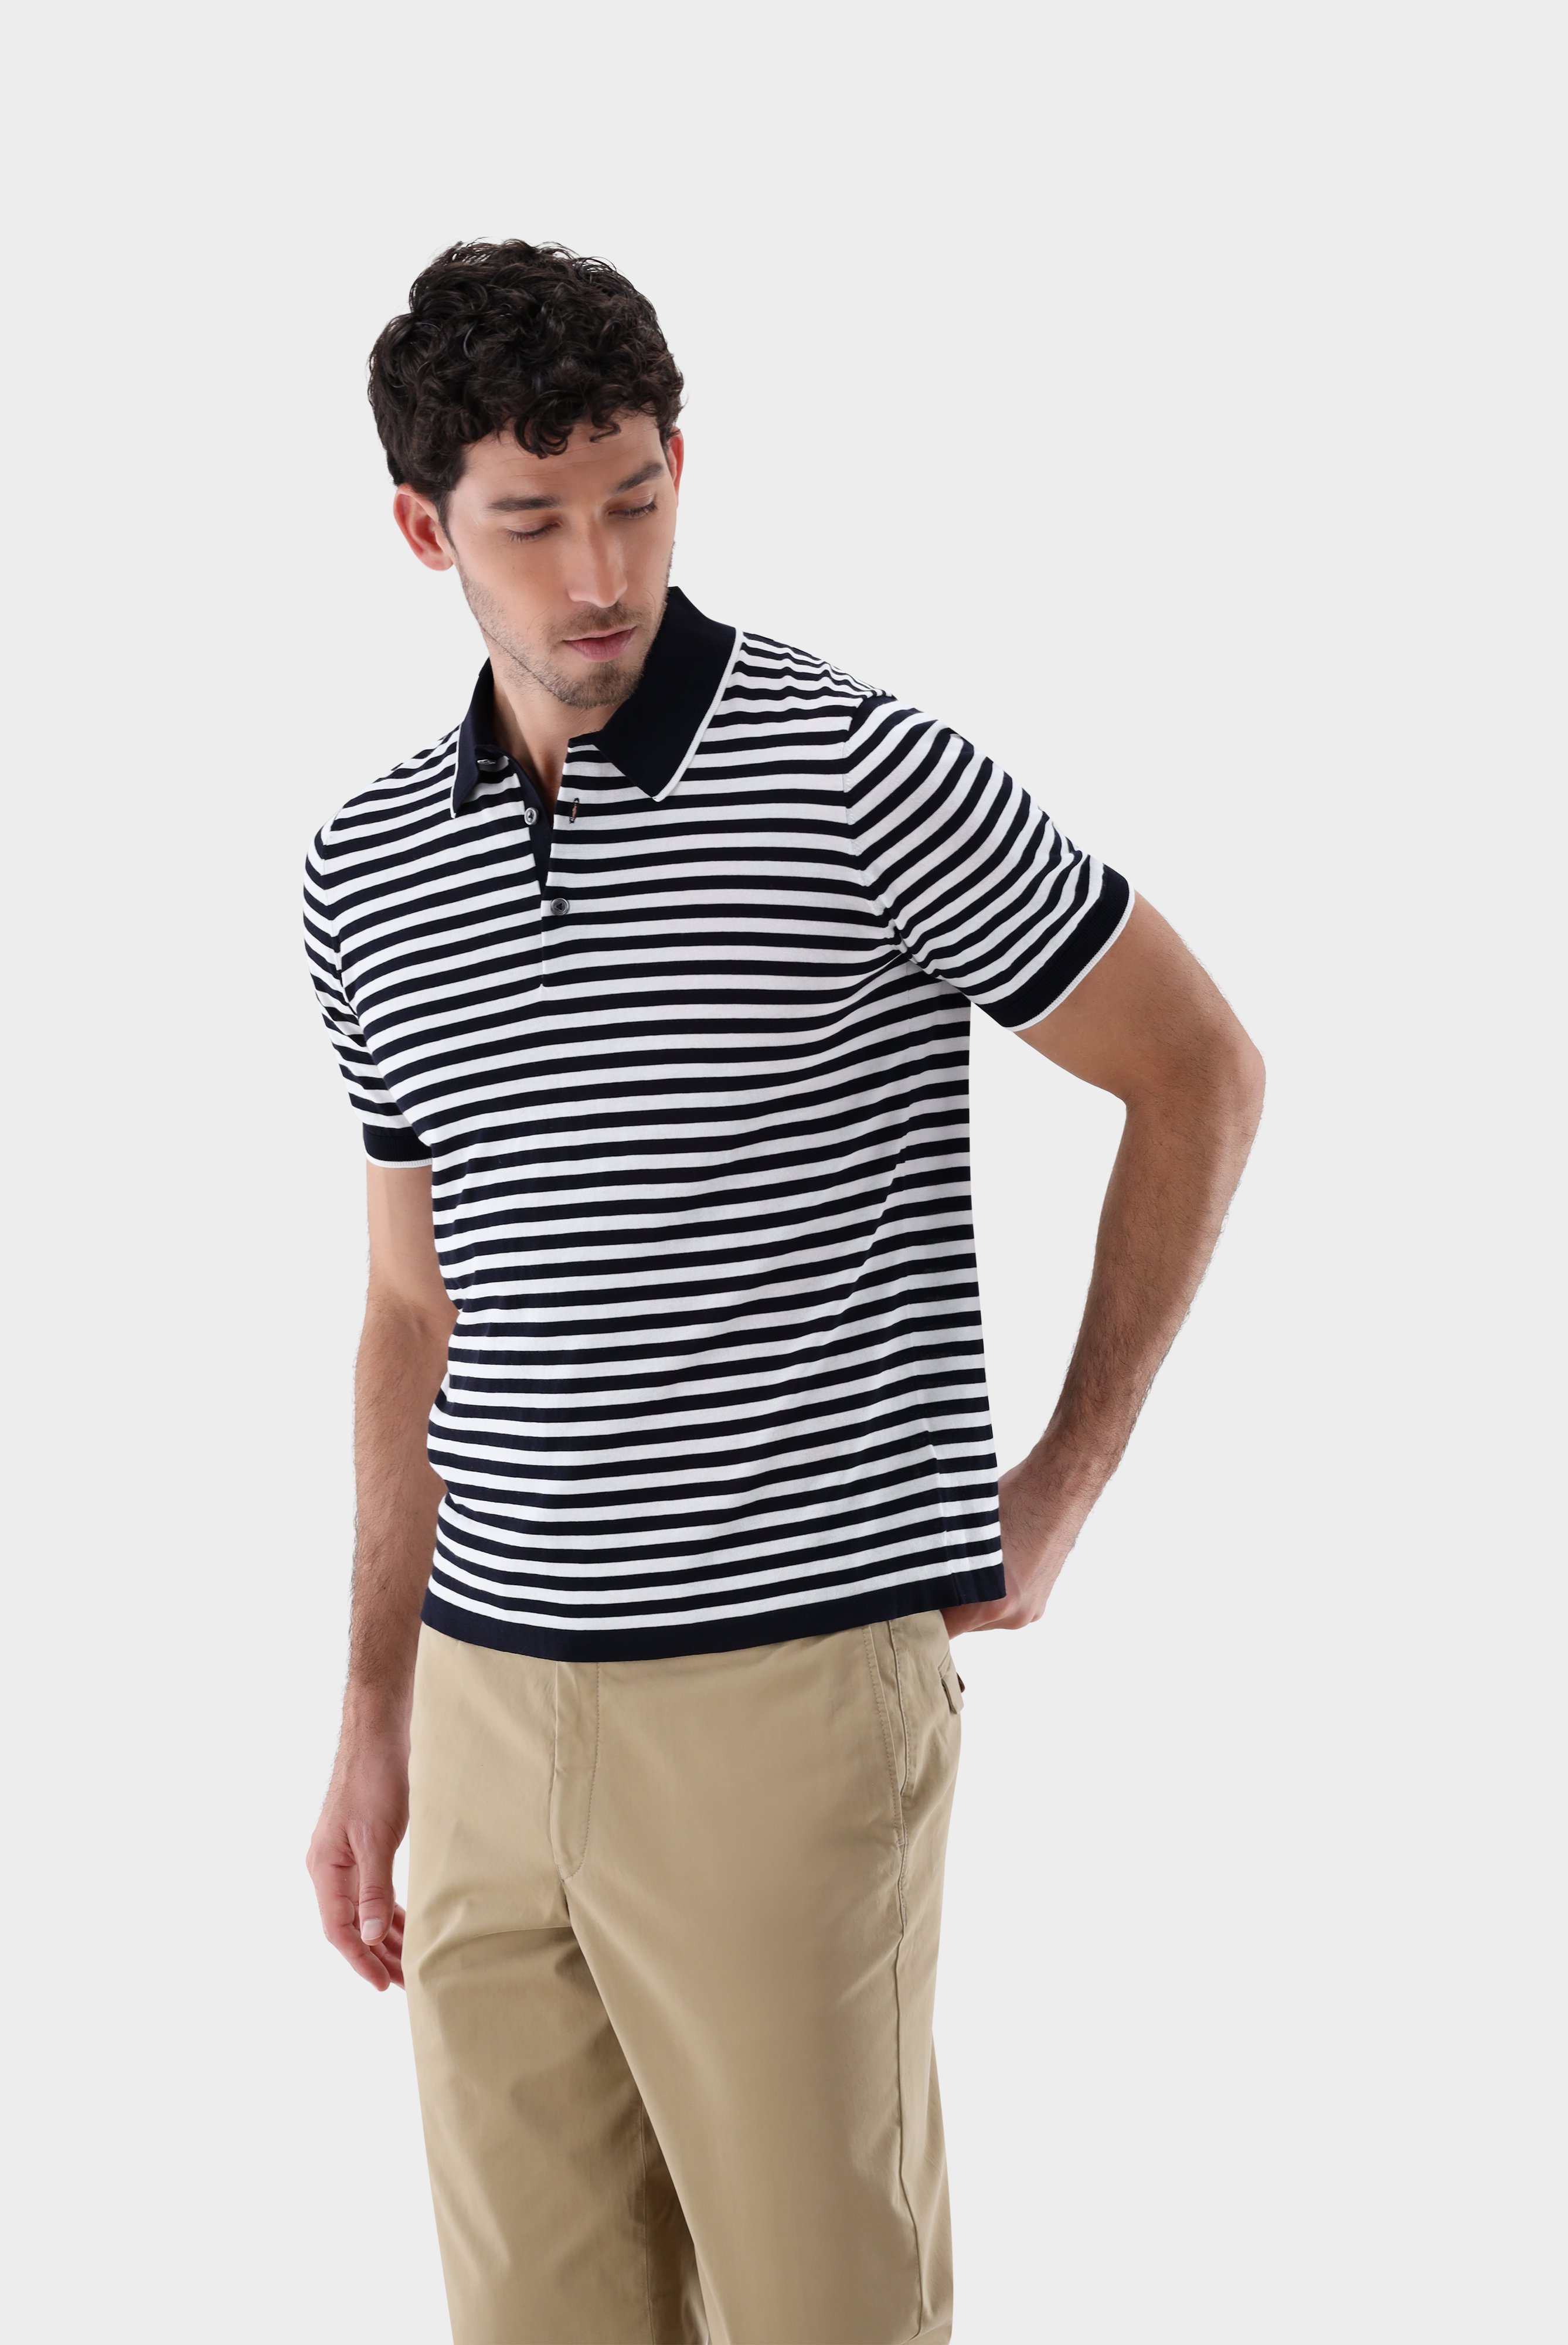 Striped Knit Polo made of Air Cotton